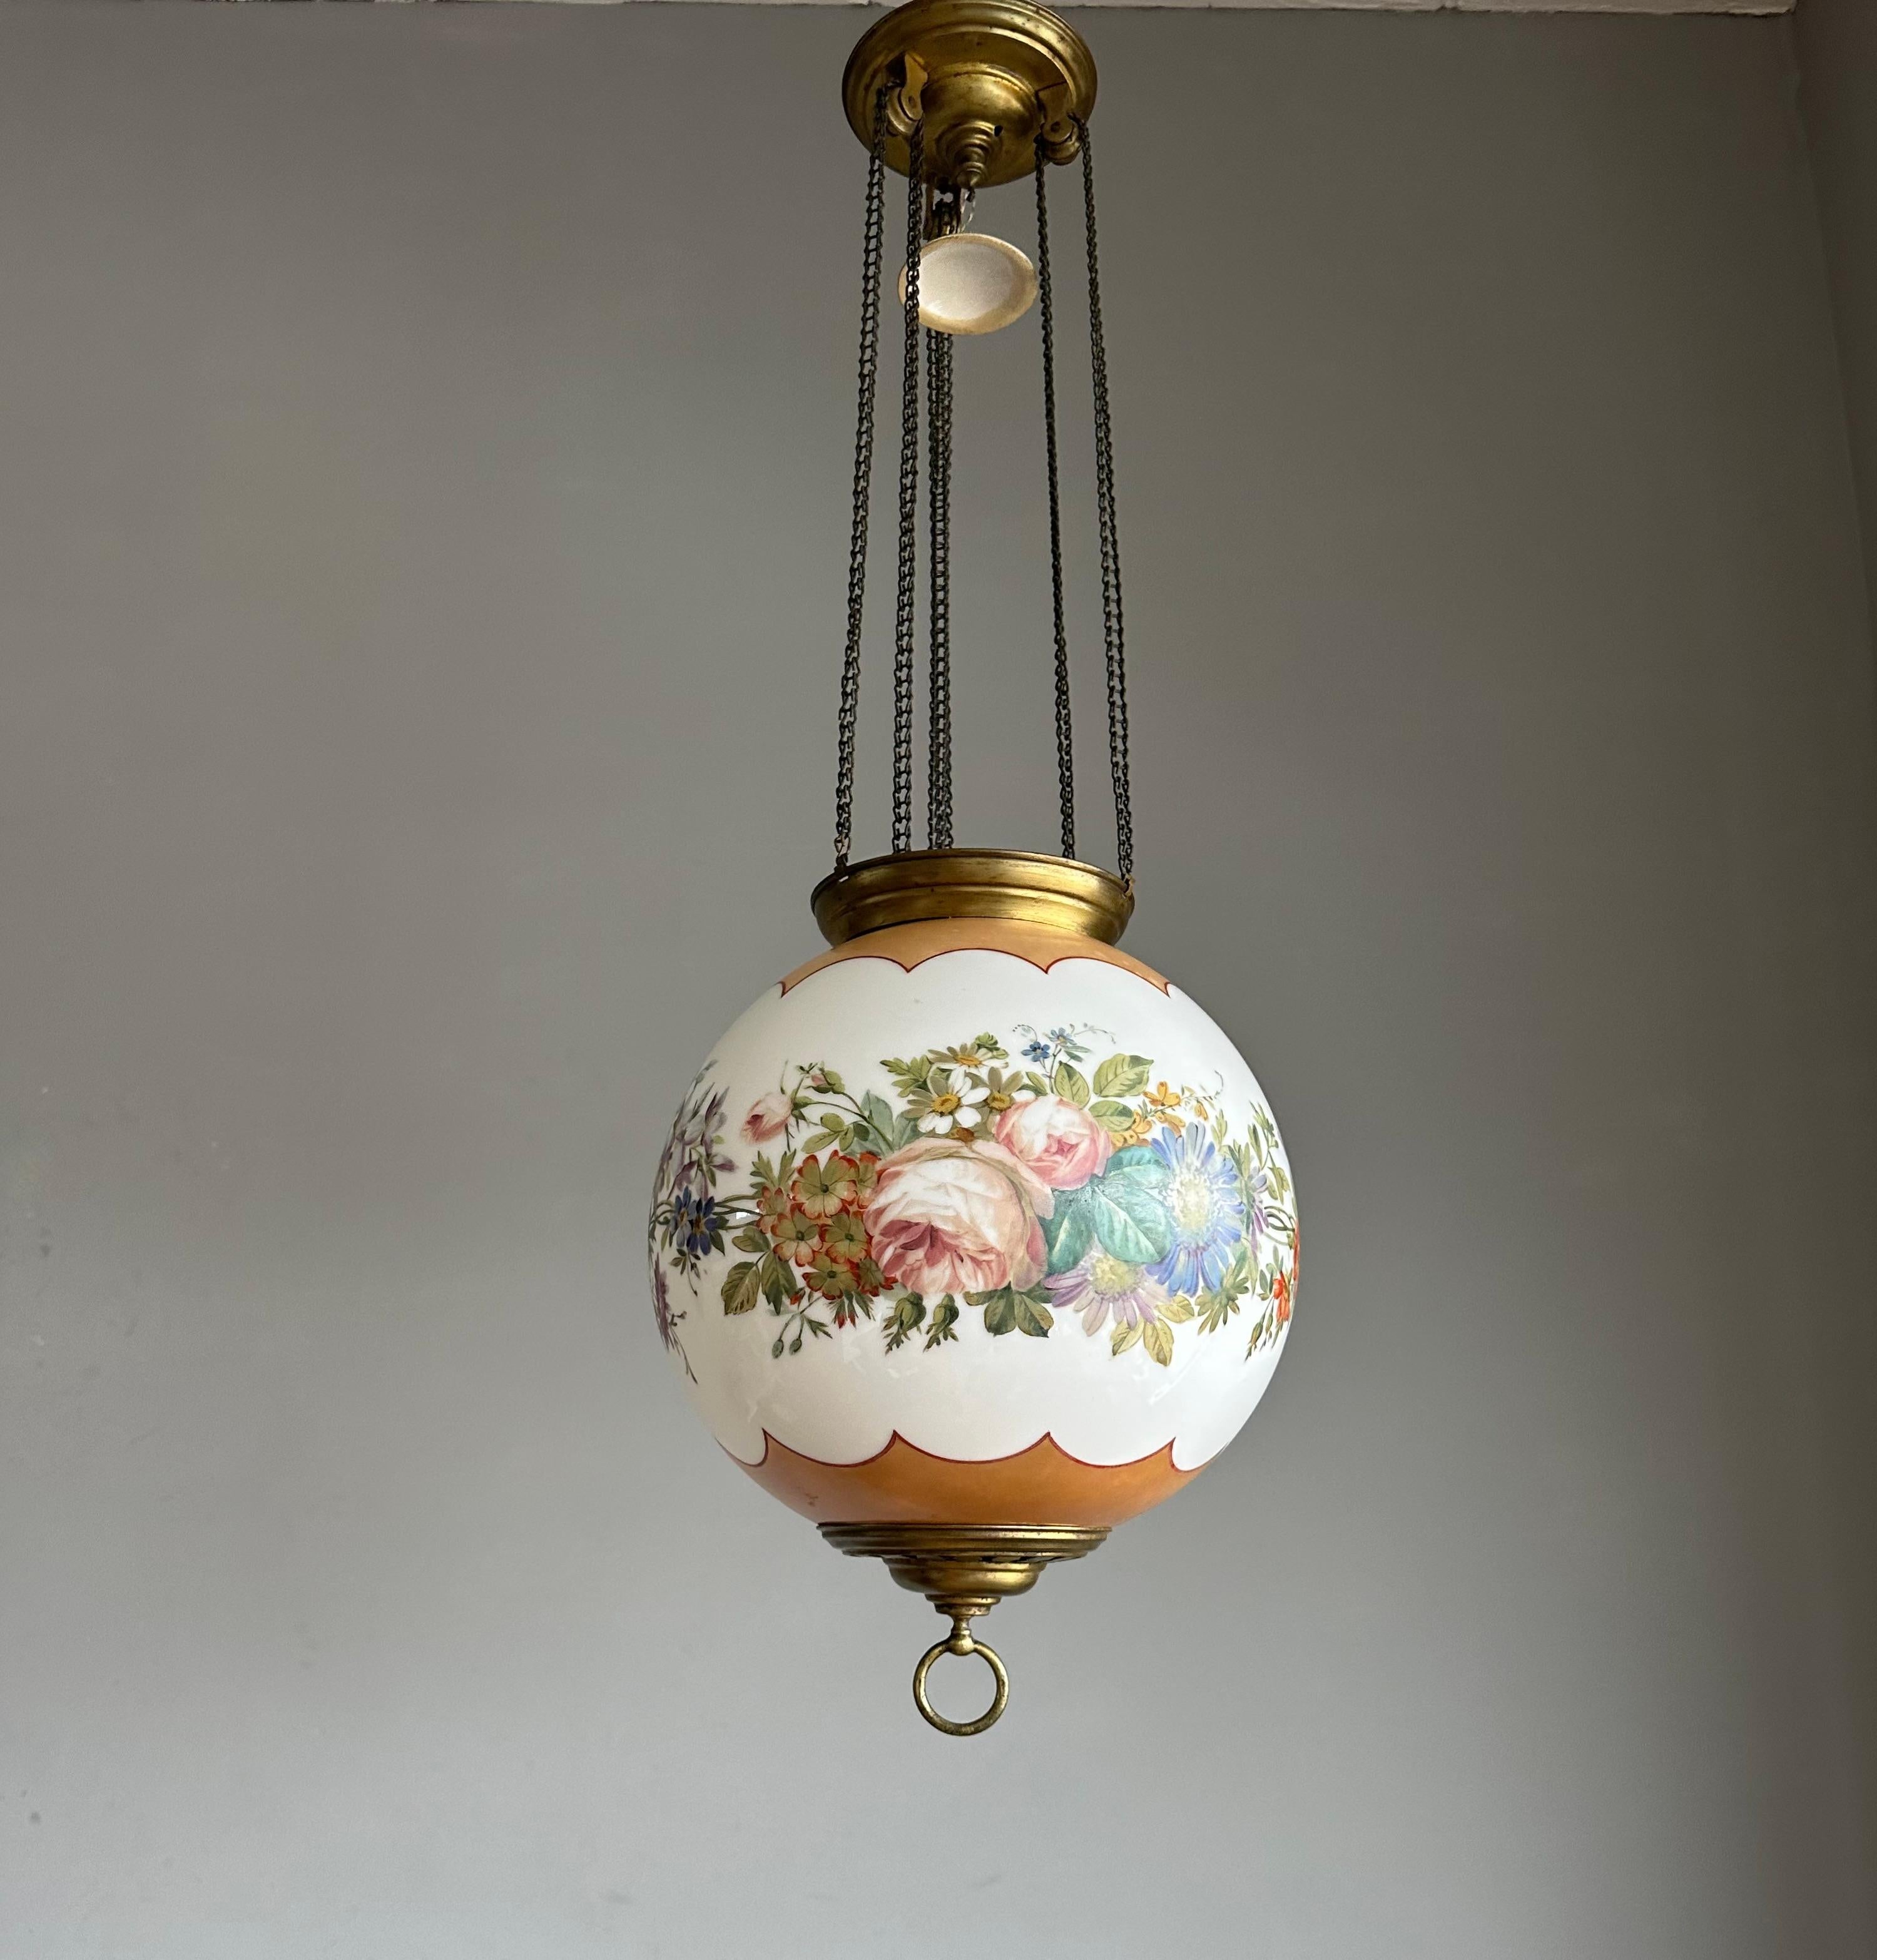 19th Century Antique Round Opaline Glass Shade Pendant Light with Wreath of Flowers Decor For Sale